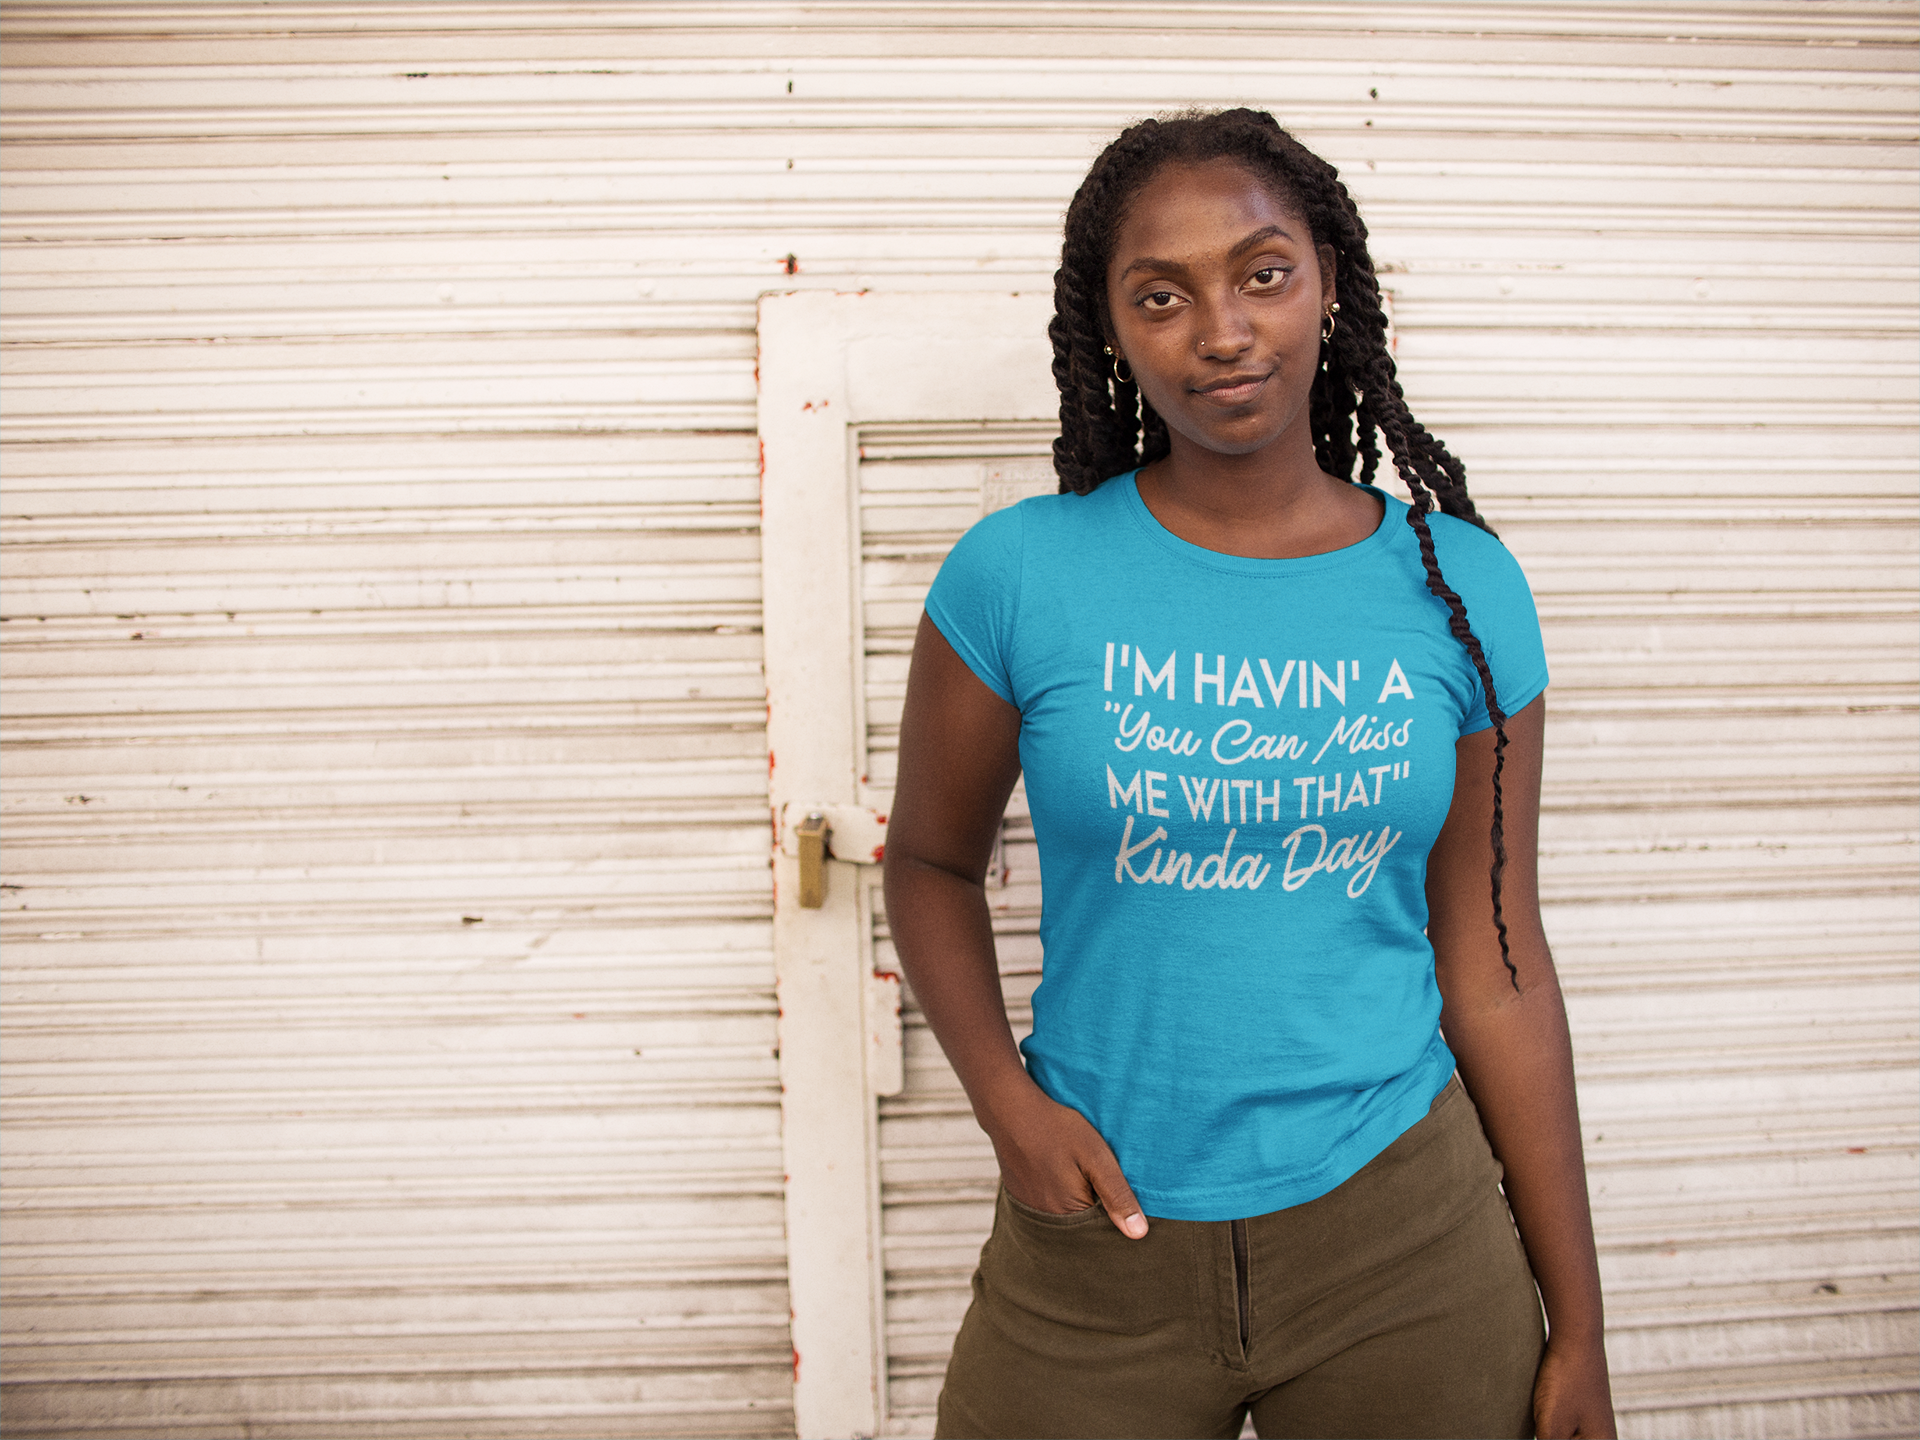 A young woman wearing a "I'm Havin' A 'You Can Miss Me With That' Kinda Day Tee" by Sharp Tact Kreativ | Tees & Gifts with Encouraging Messages to Brighten Your Day with a Bit of Wit.